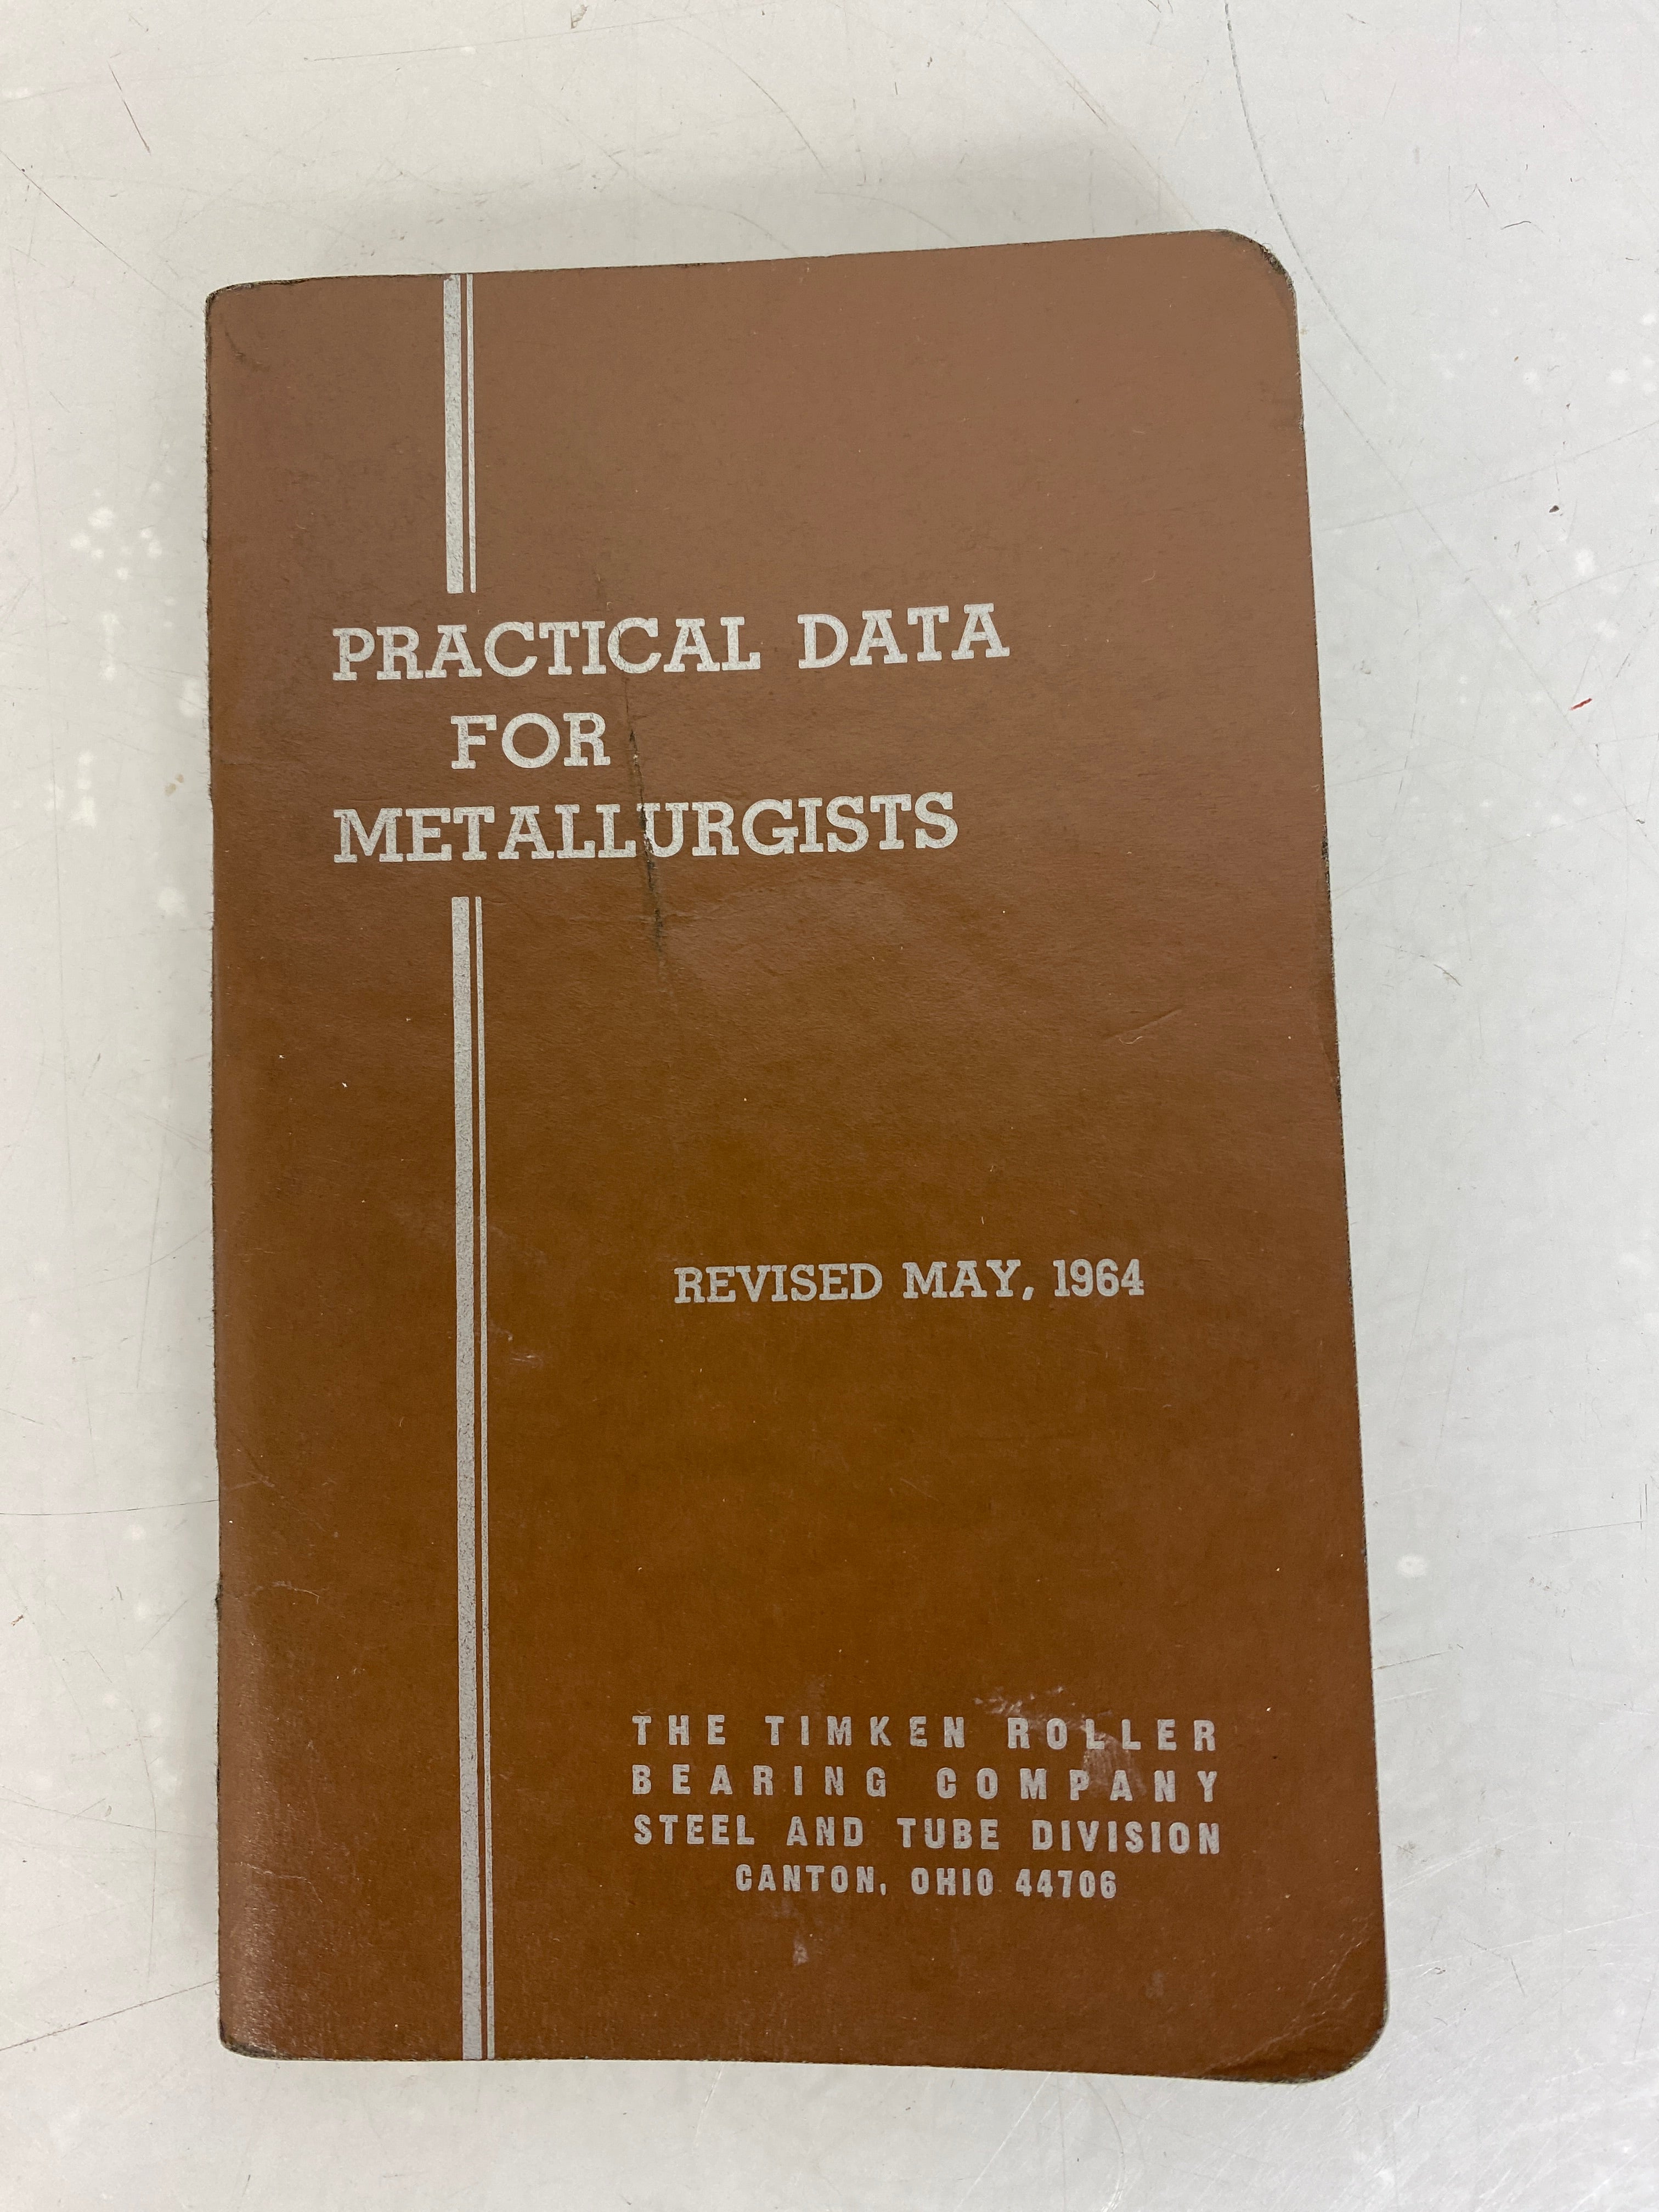 Quick Facts About Alloy Steels & Practical Data for Metallurgists 1960s SC